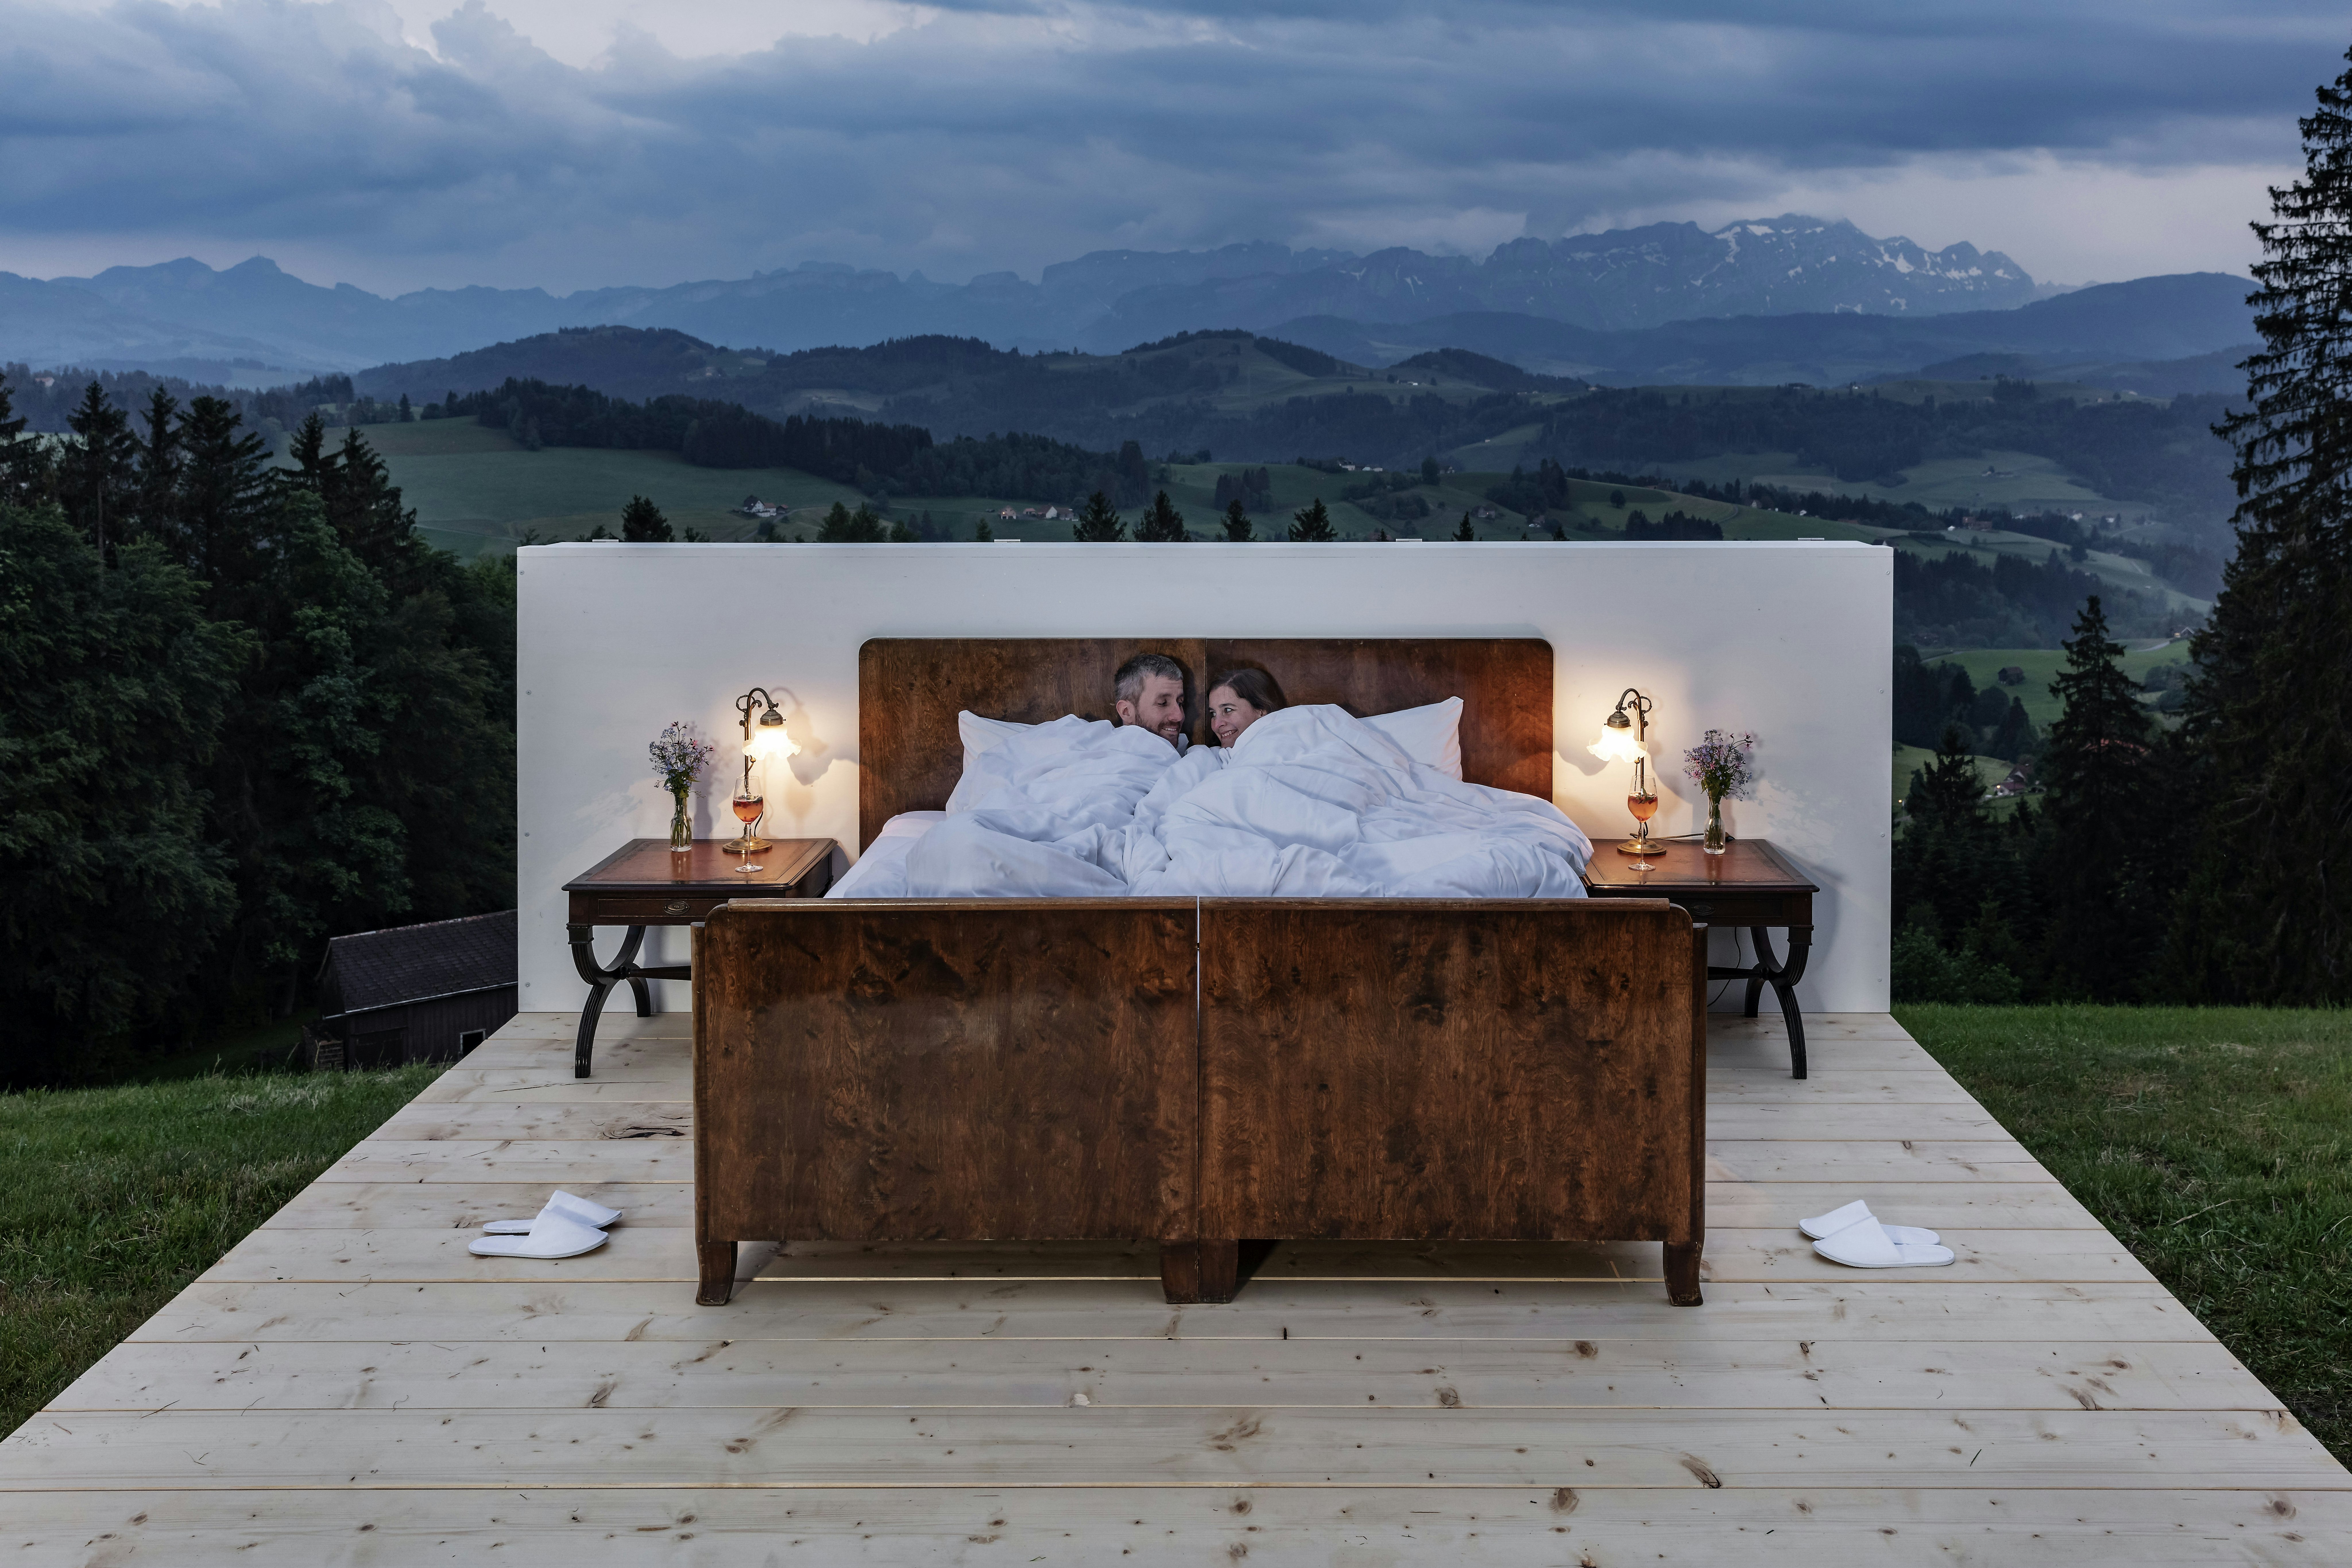 A couple lies in bed in a room without windows in the Swiss Alps